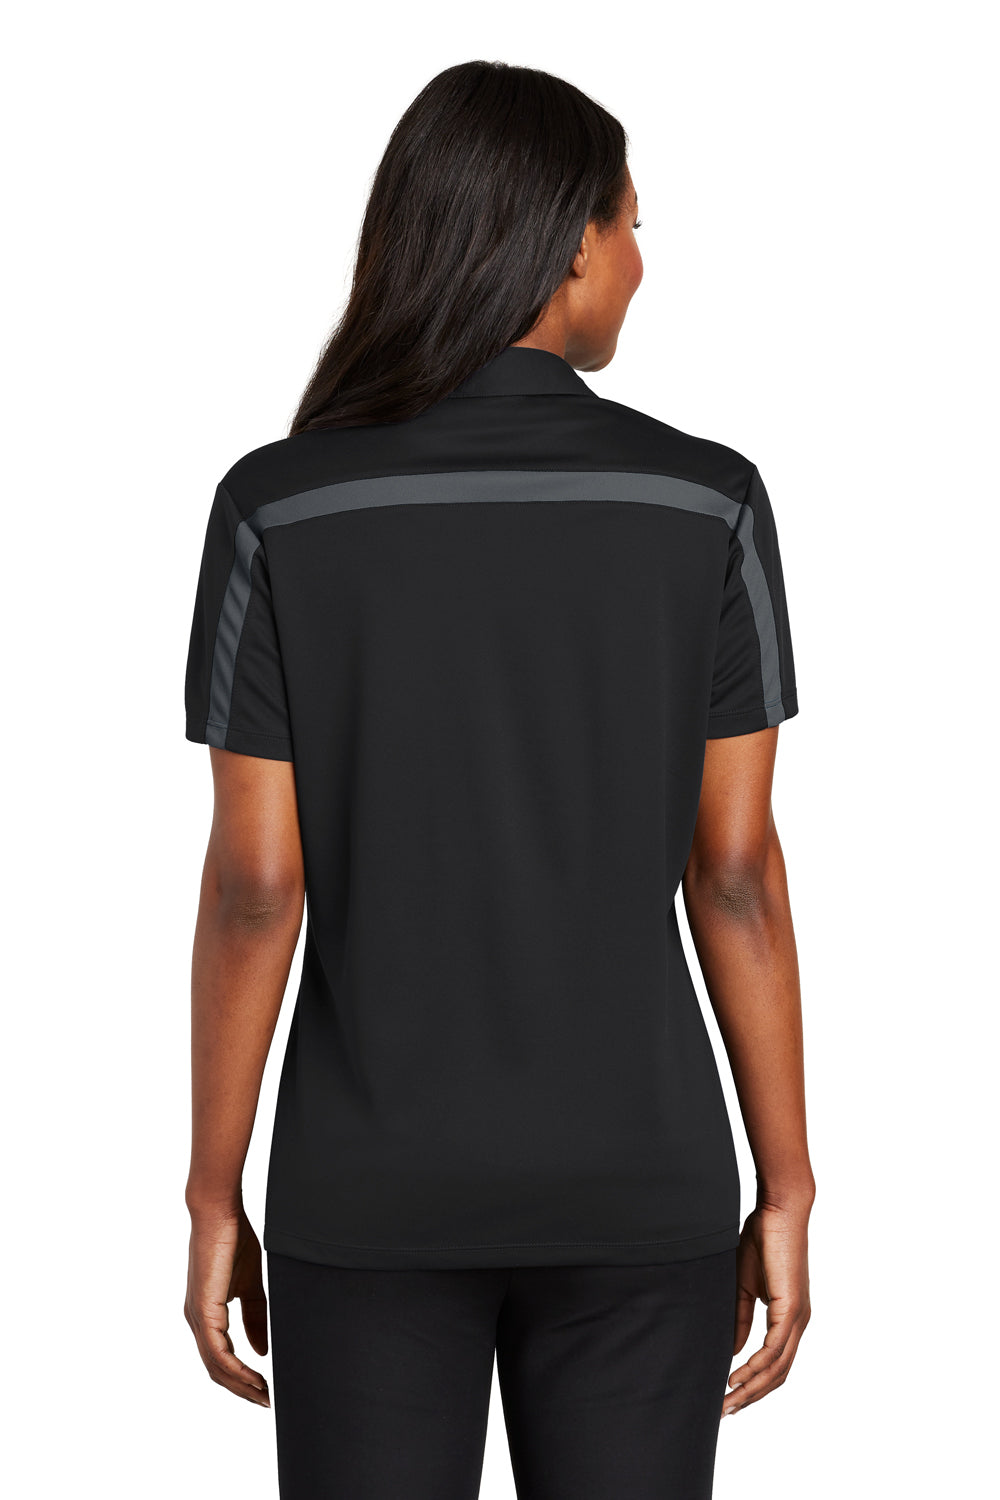 Port Authority L547 Womens Silk Touch Performance Moisture Wicking Short Sleeve Polo Shirt Black/Grey Back